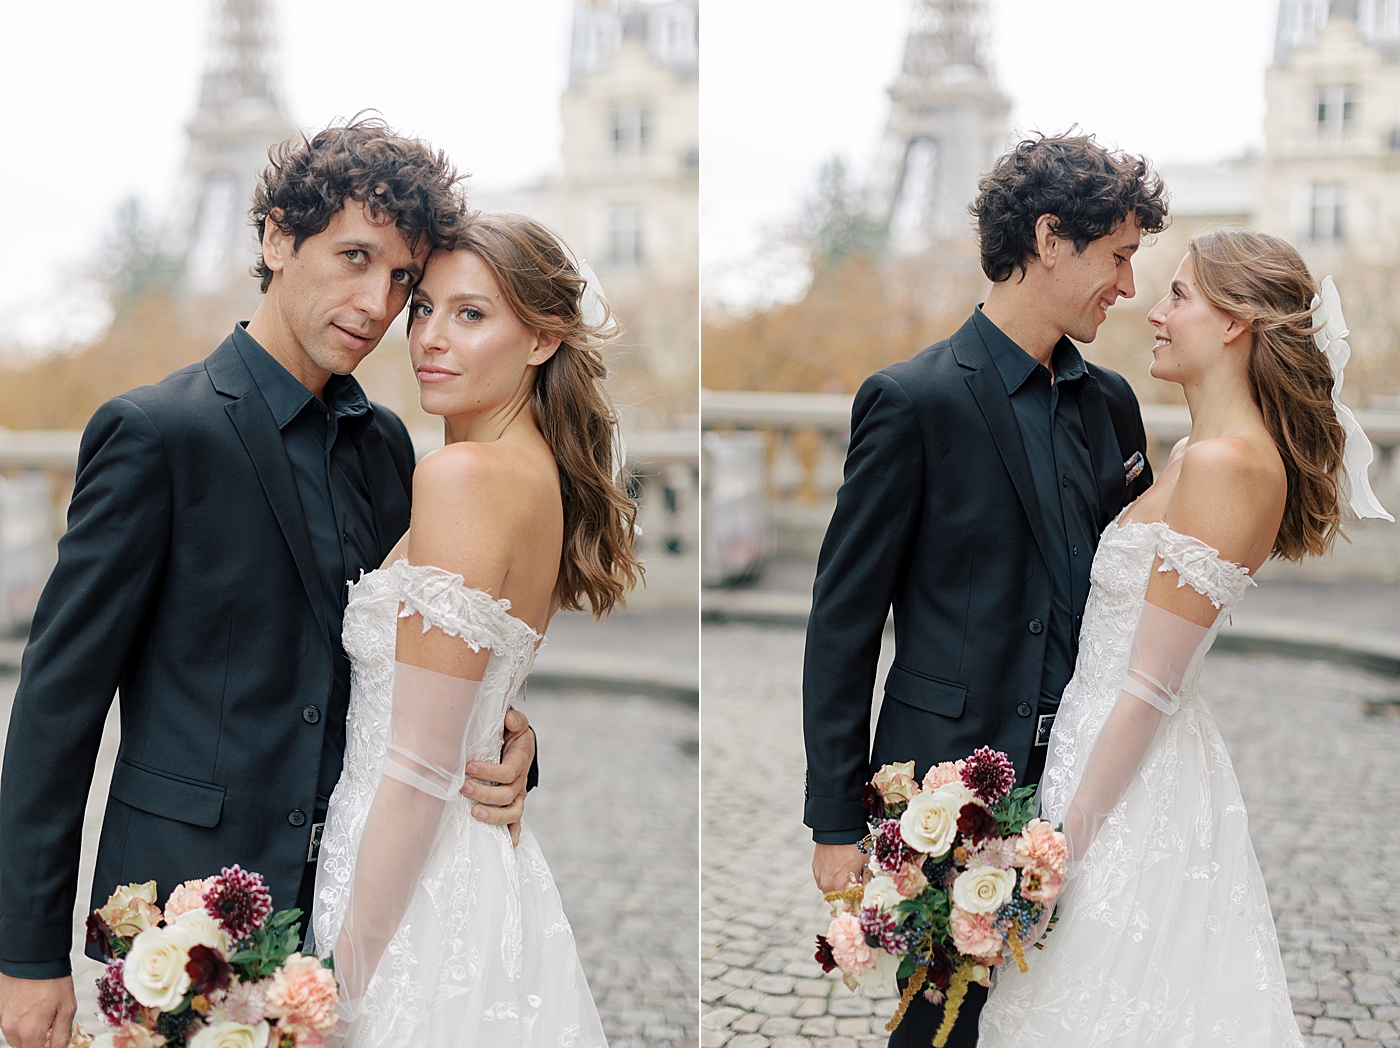 Dual image of a bride and groom embracing and looking at each other in Paris with the Eiffel tower in the background| Image by Hope Helmuth Photography